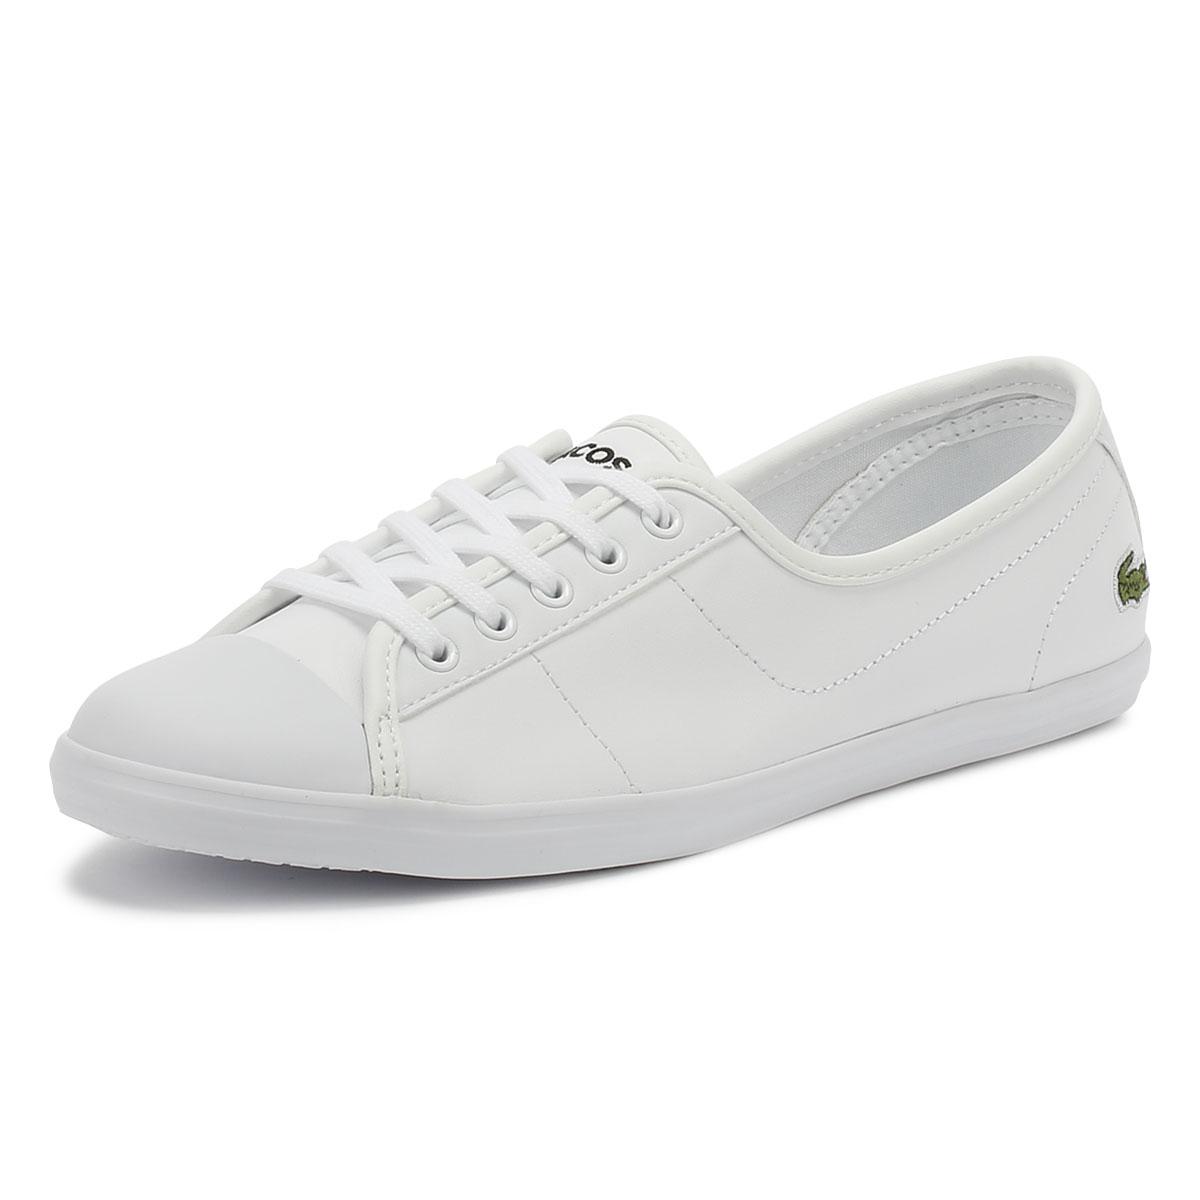 Lacoste Leather Ziane Bl 1 Cfa Womens White Trainers - Lyst